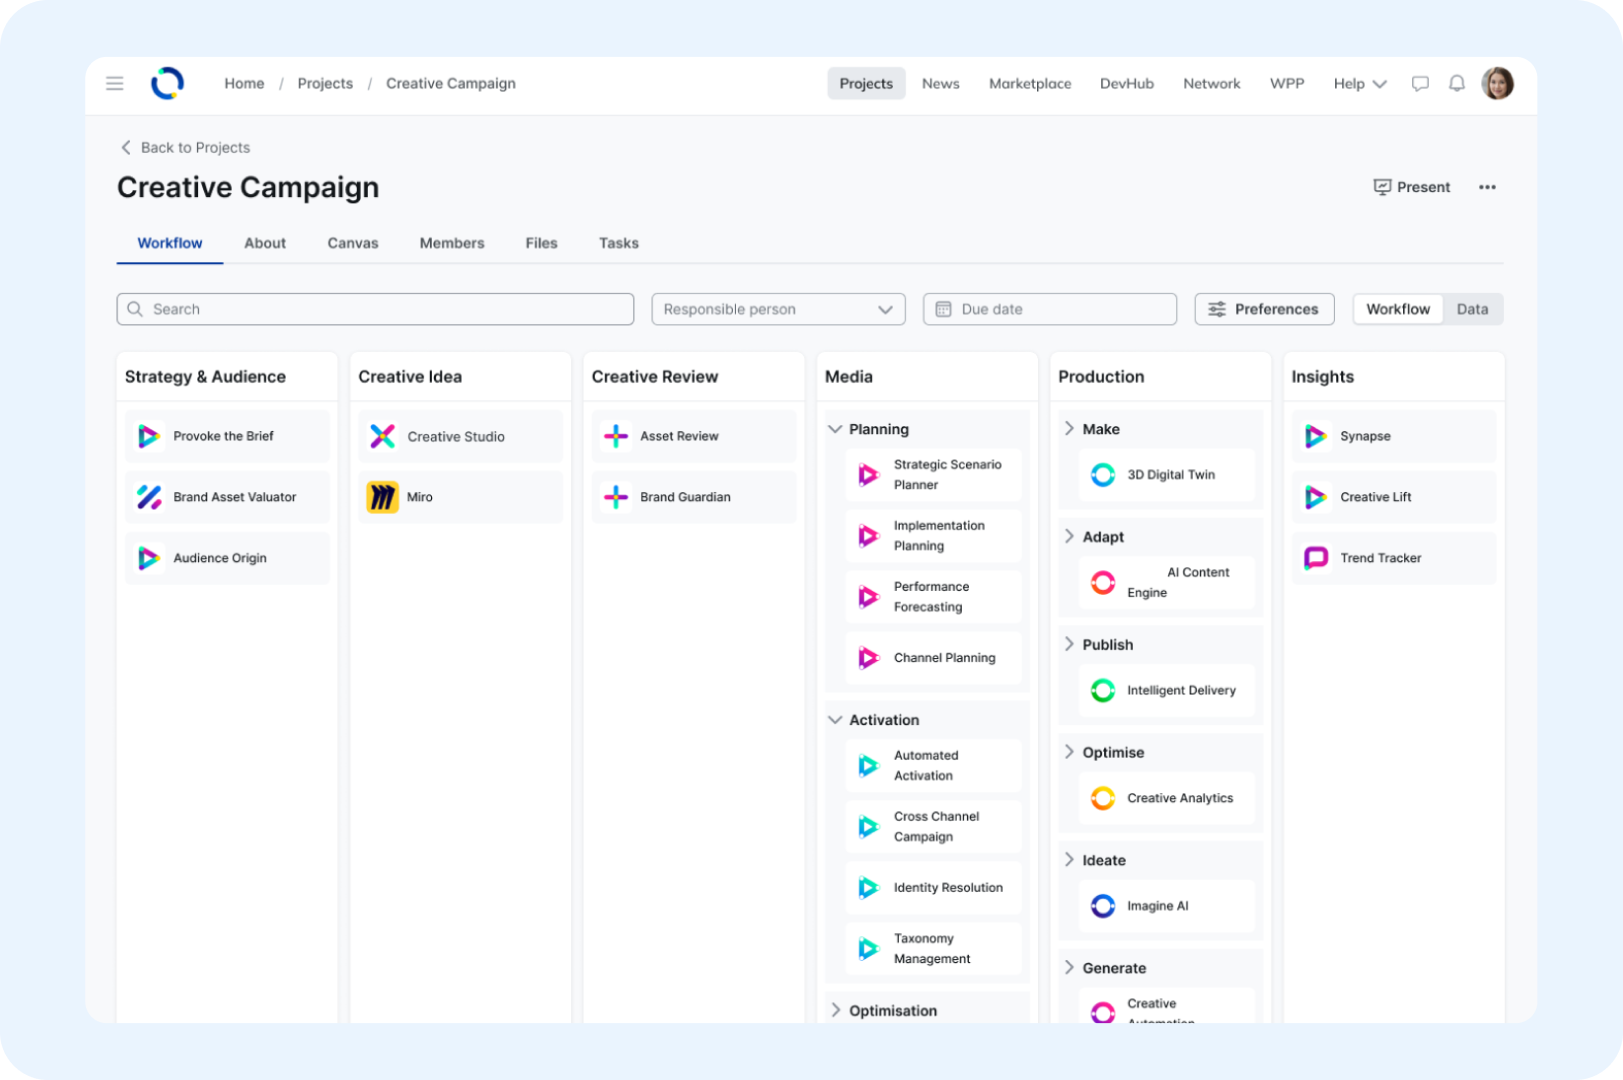 Screenshot from WPP Open showing project workflows